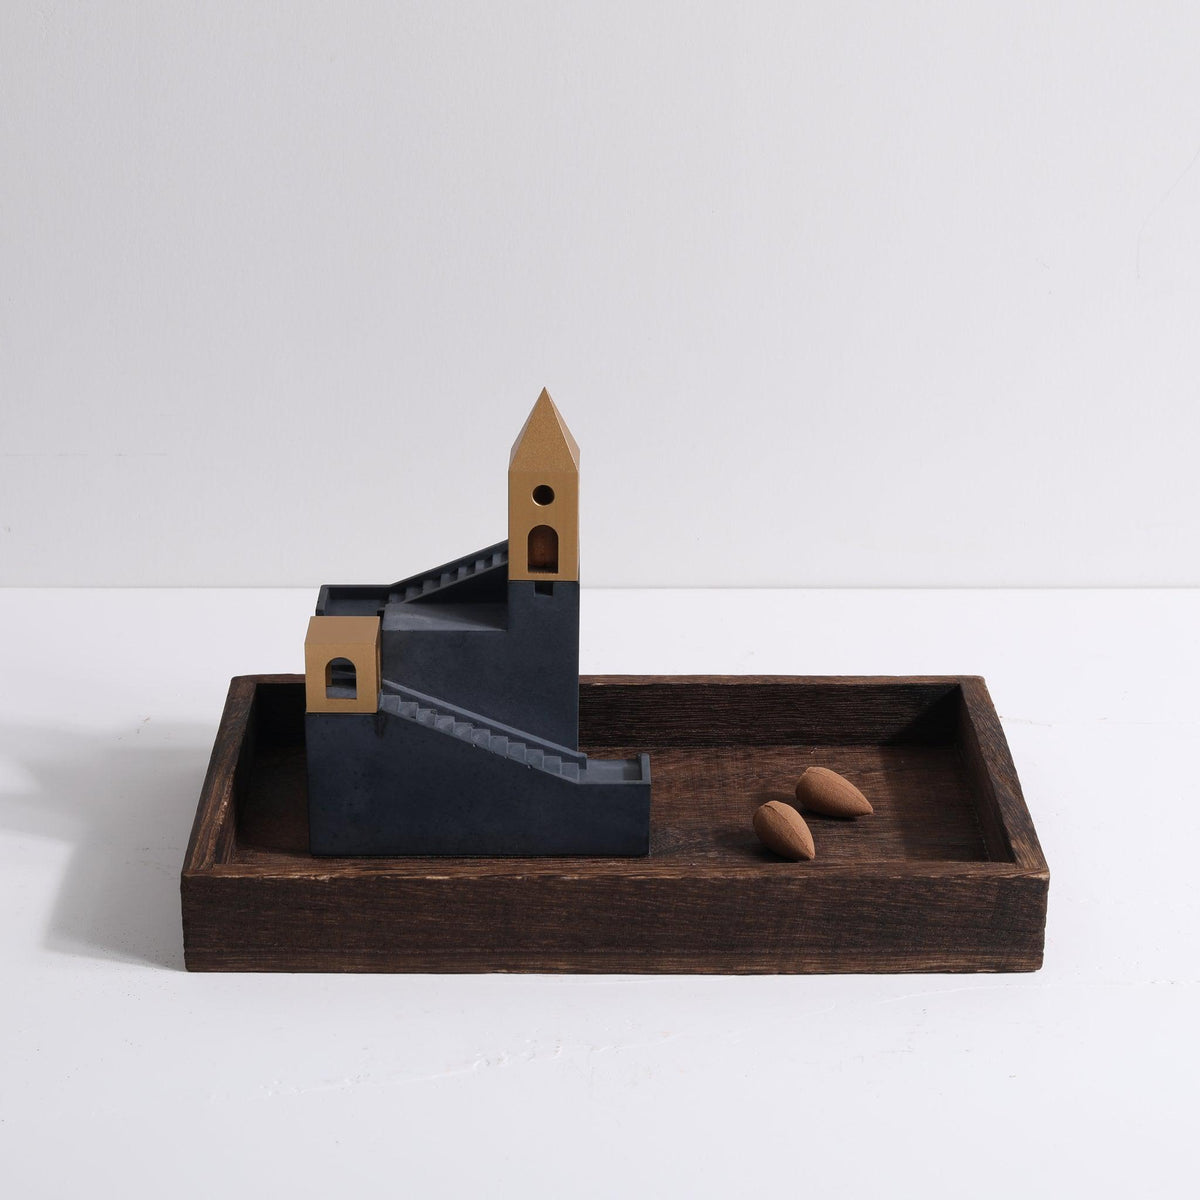 Cloud Keep Backflow Incense Burner by Kin Objects with Wooden Tray